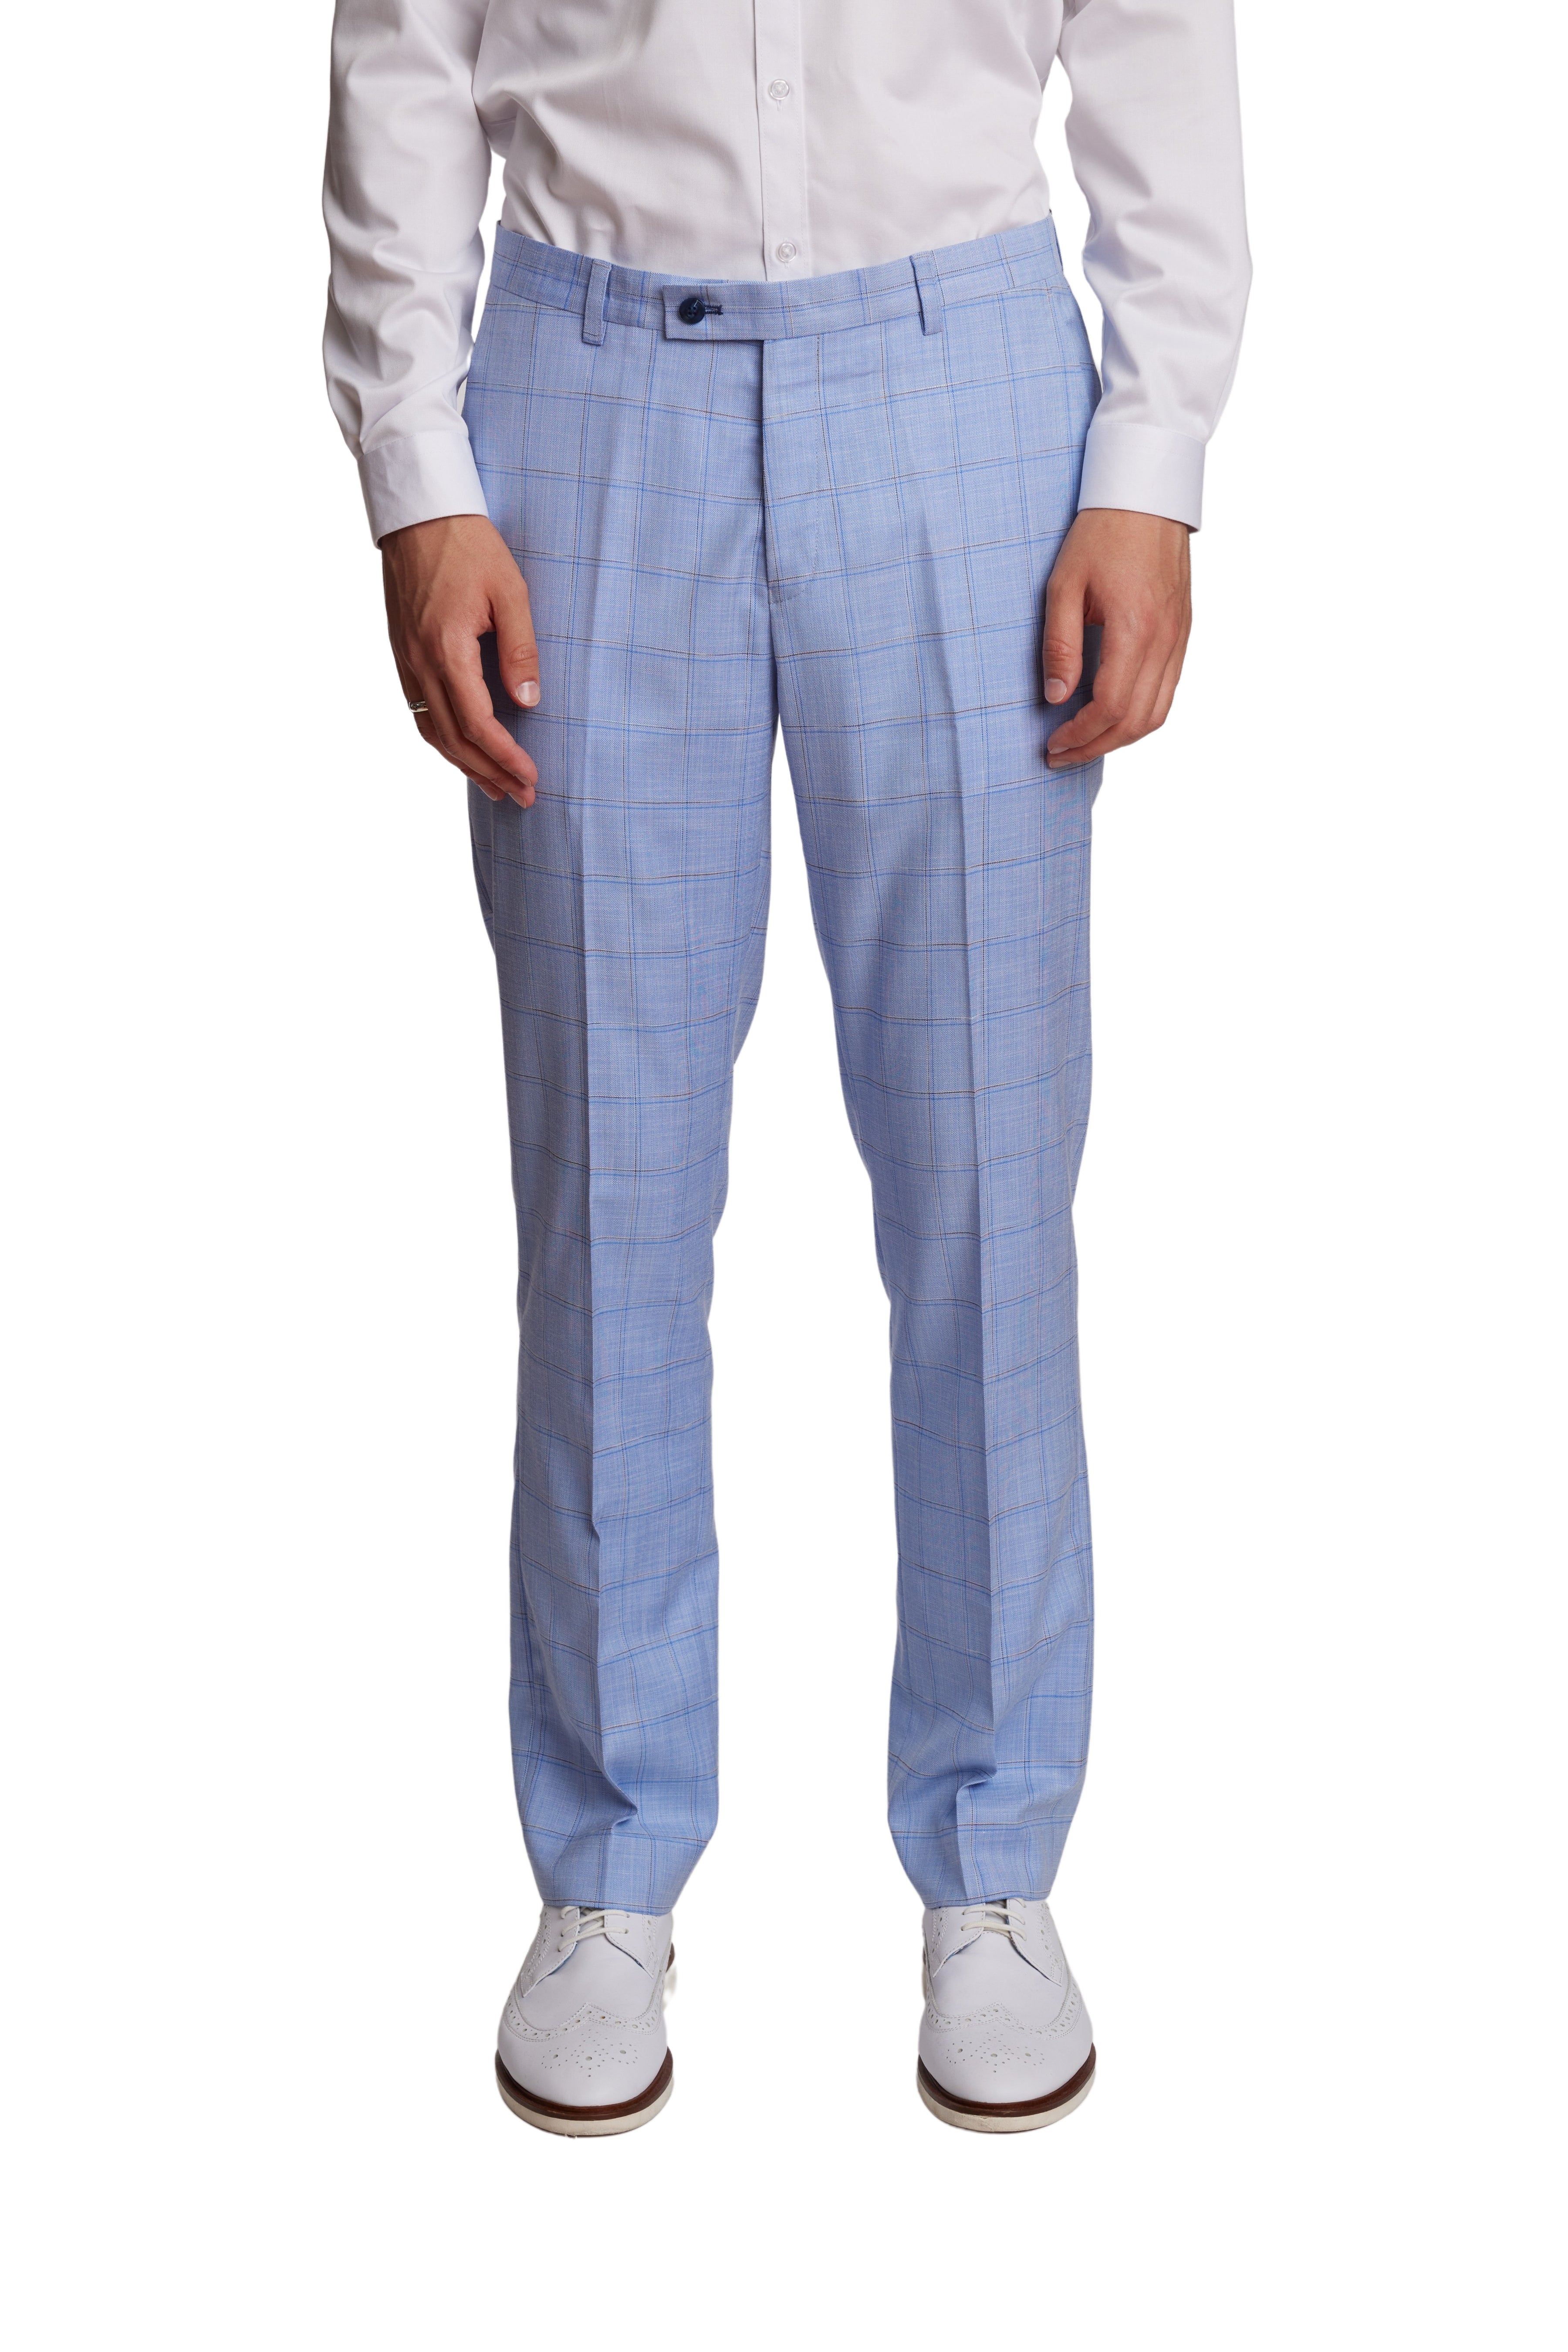 Downing Pants - slim - Blue Double Check